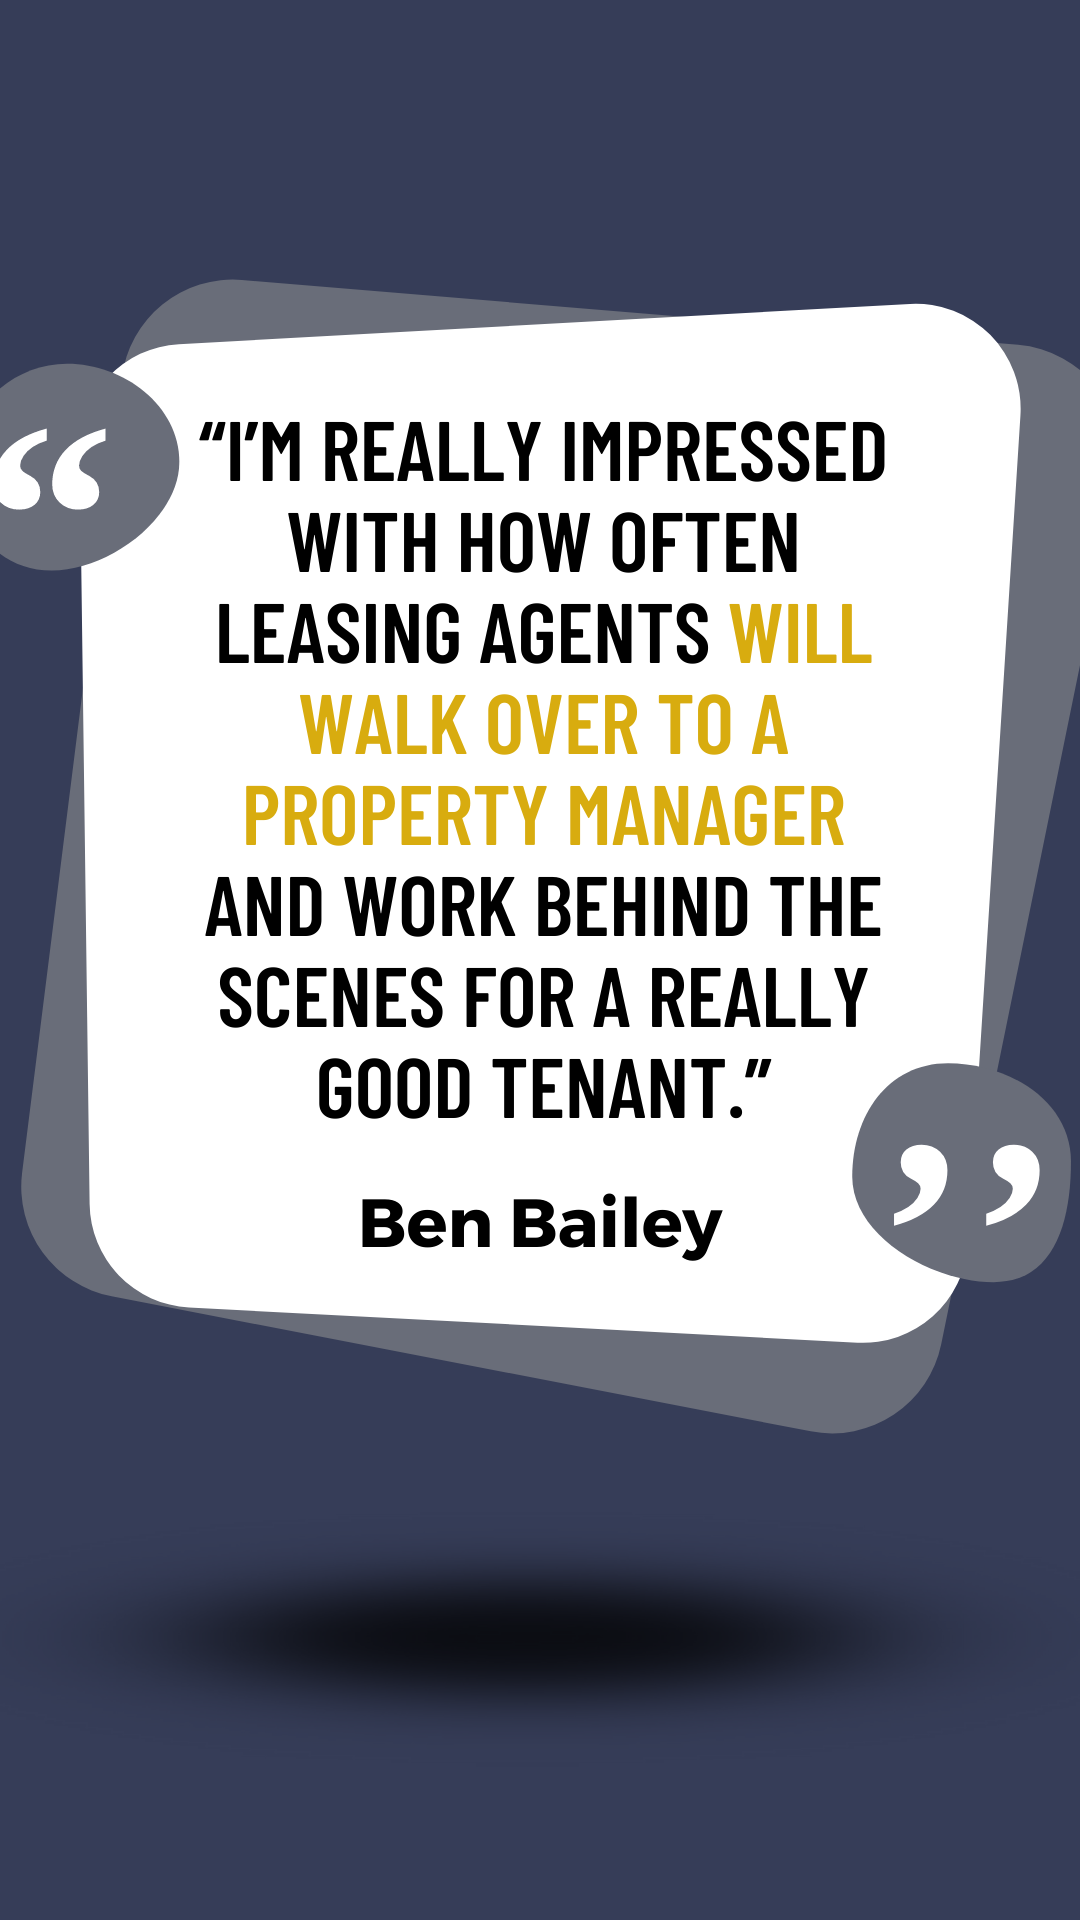 Quote2_story_impressed with leasing agents